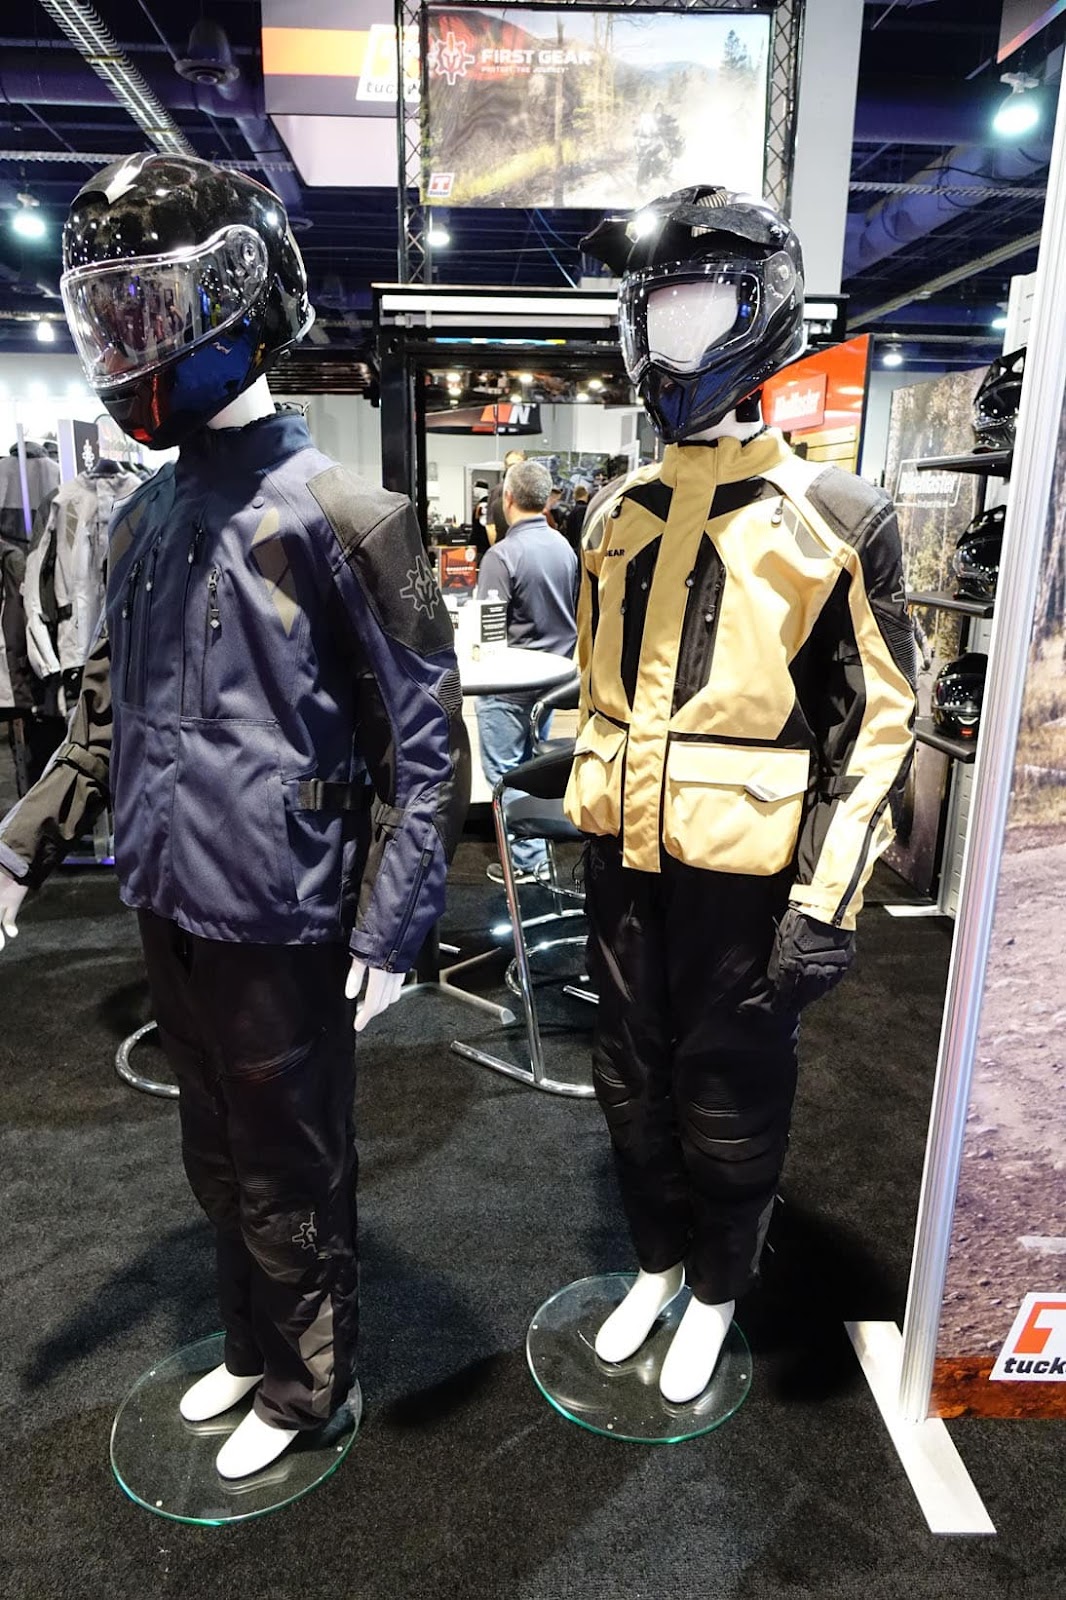 Custom riding suits steal the show at AIMExpo, the ultimate powersports trade event